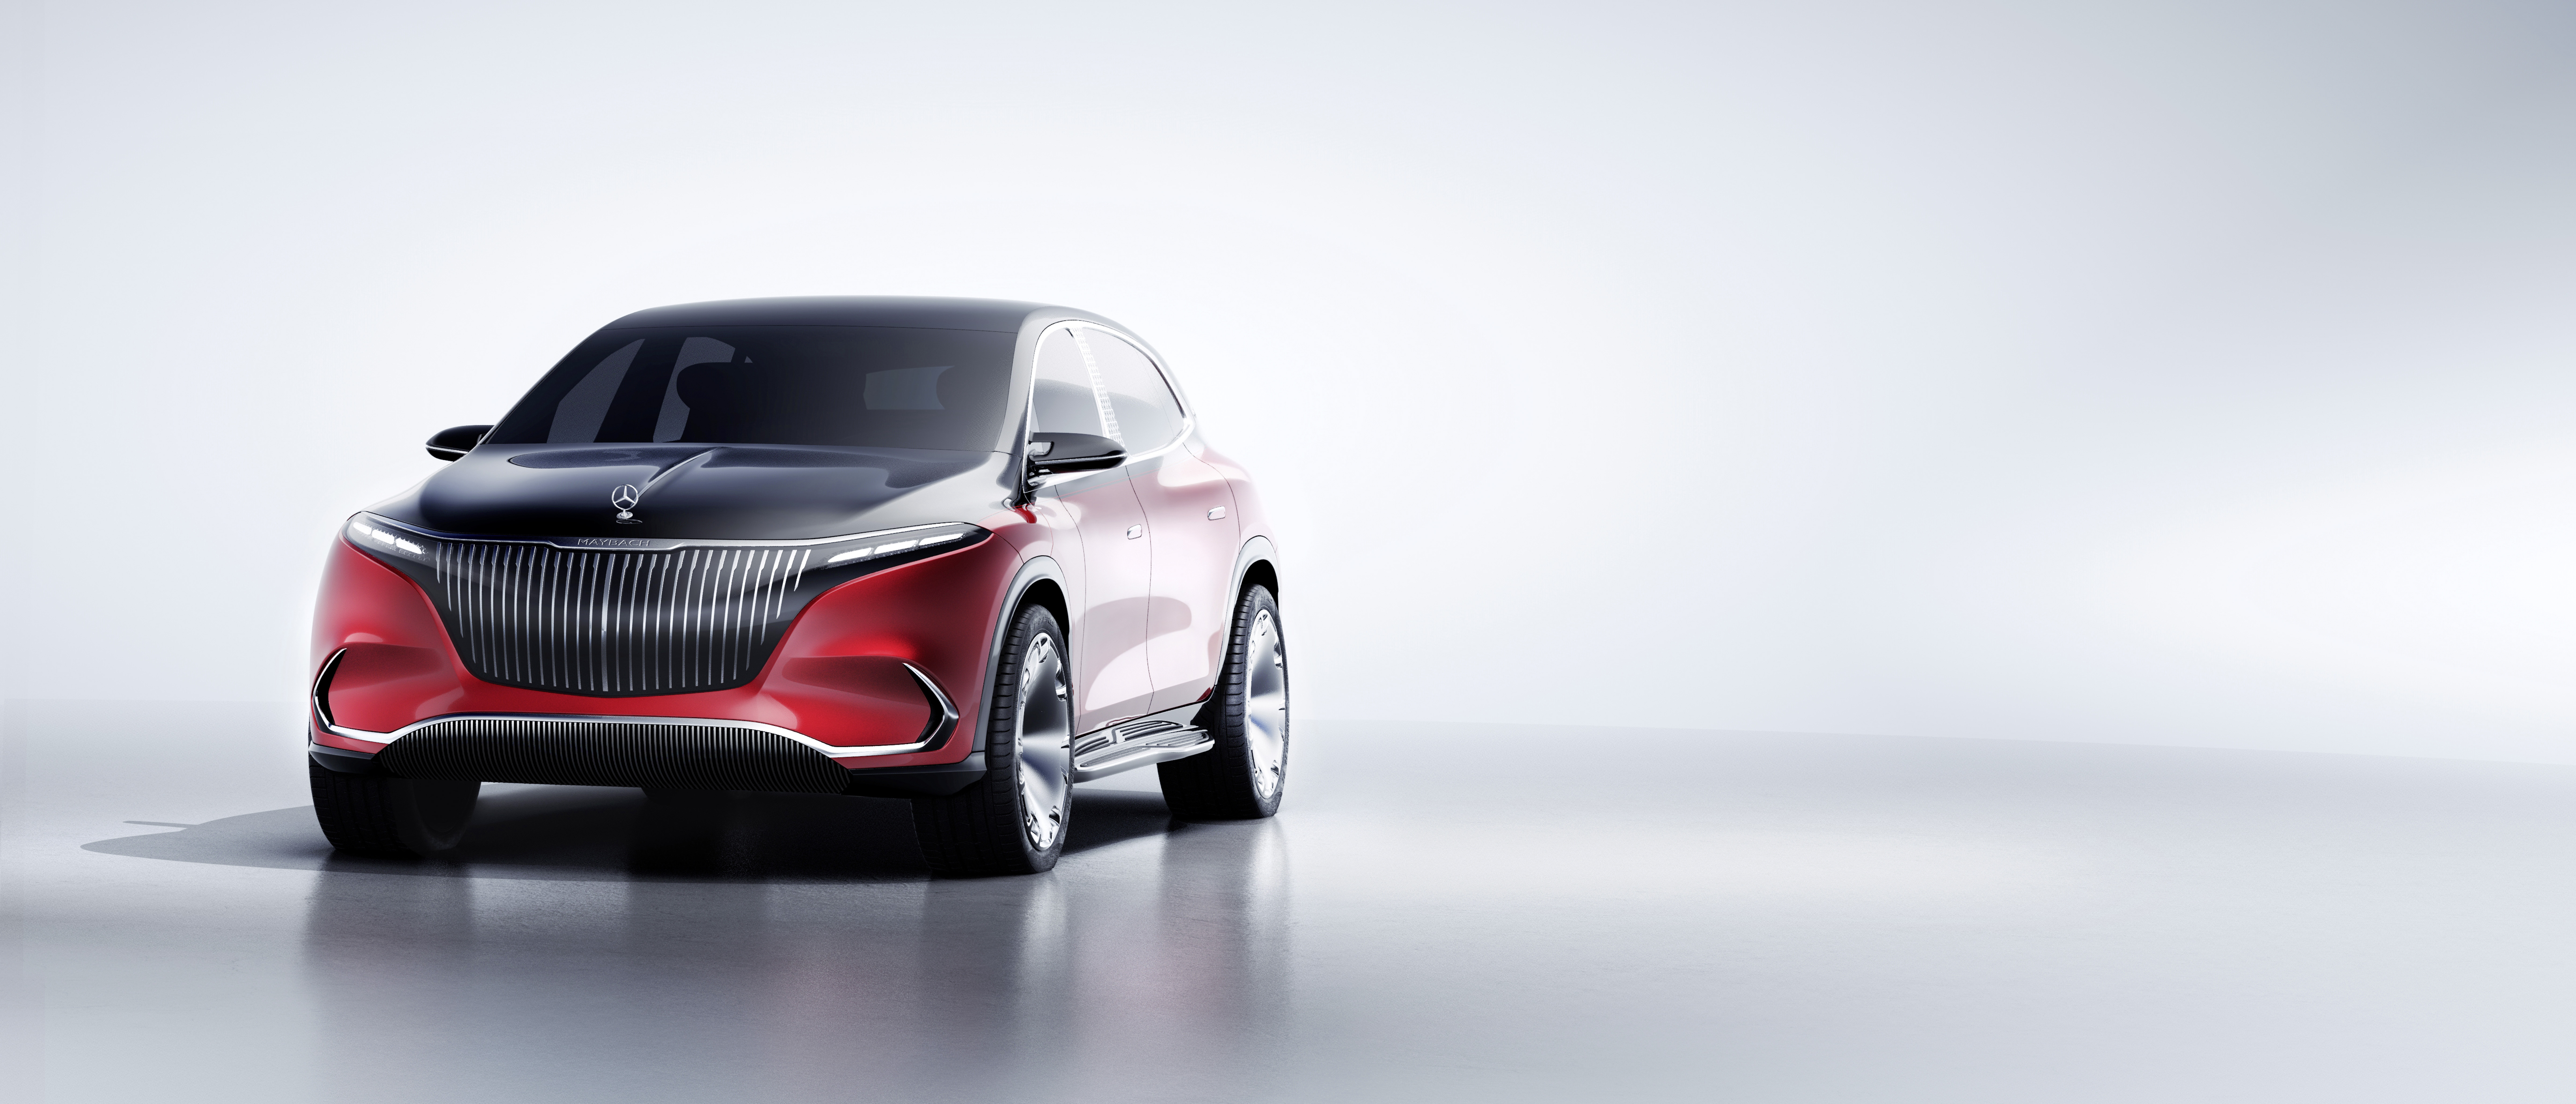 1920x1080 Mercedes Maybach Eqs Wallpapers